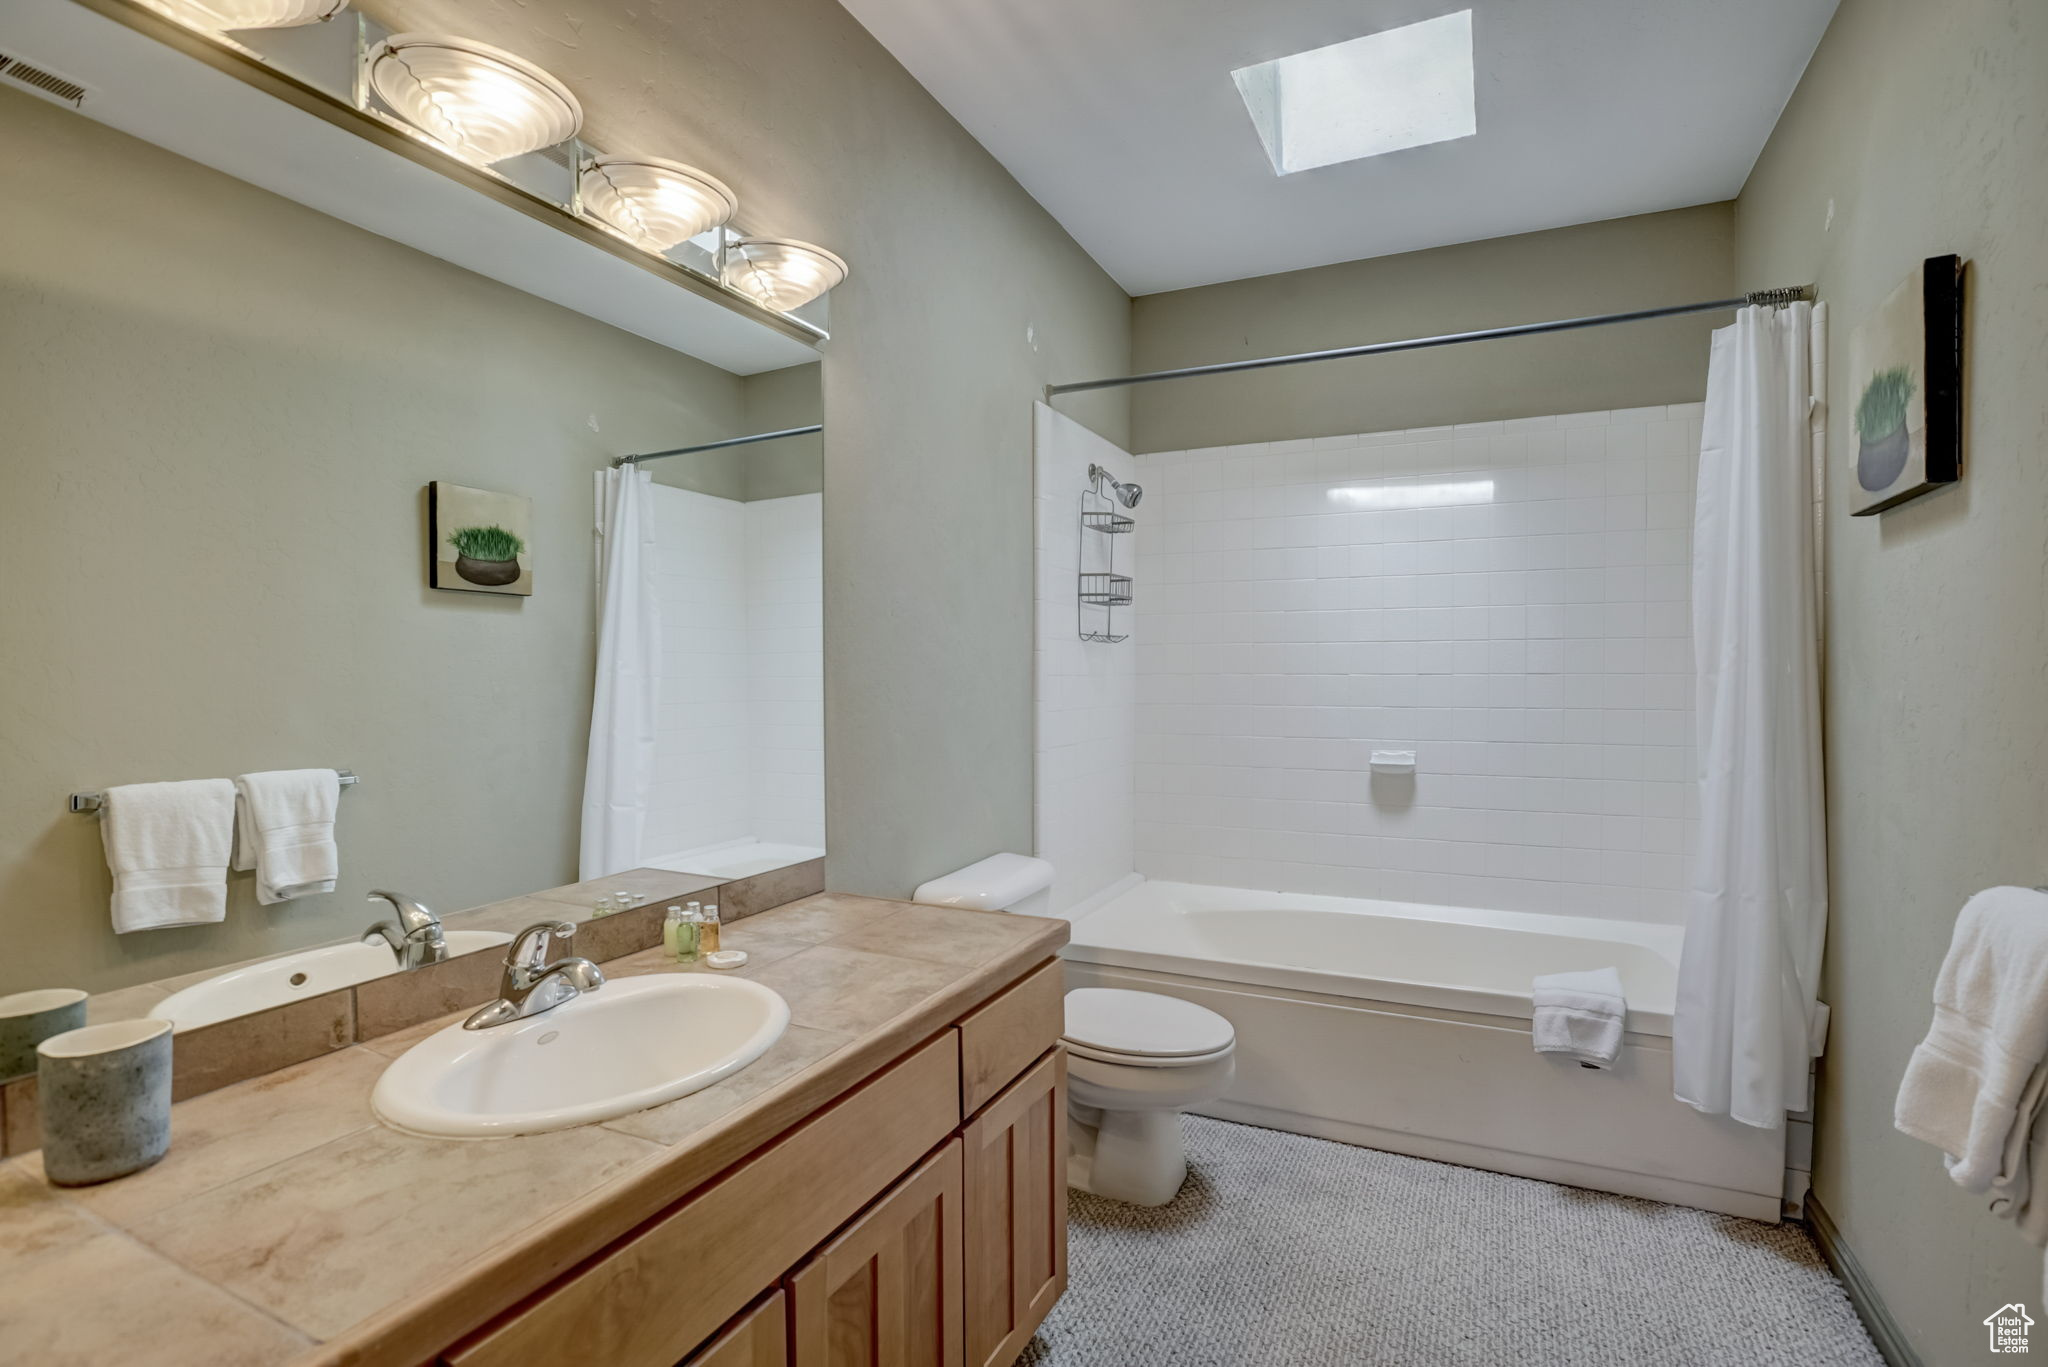 Full bathroom featuring toilet, shower / tub combo with curtain, vanity, and a skylight